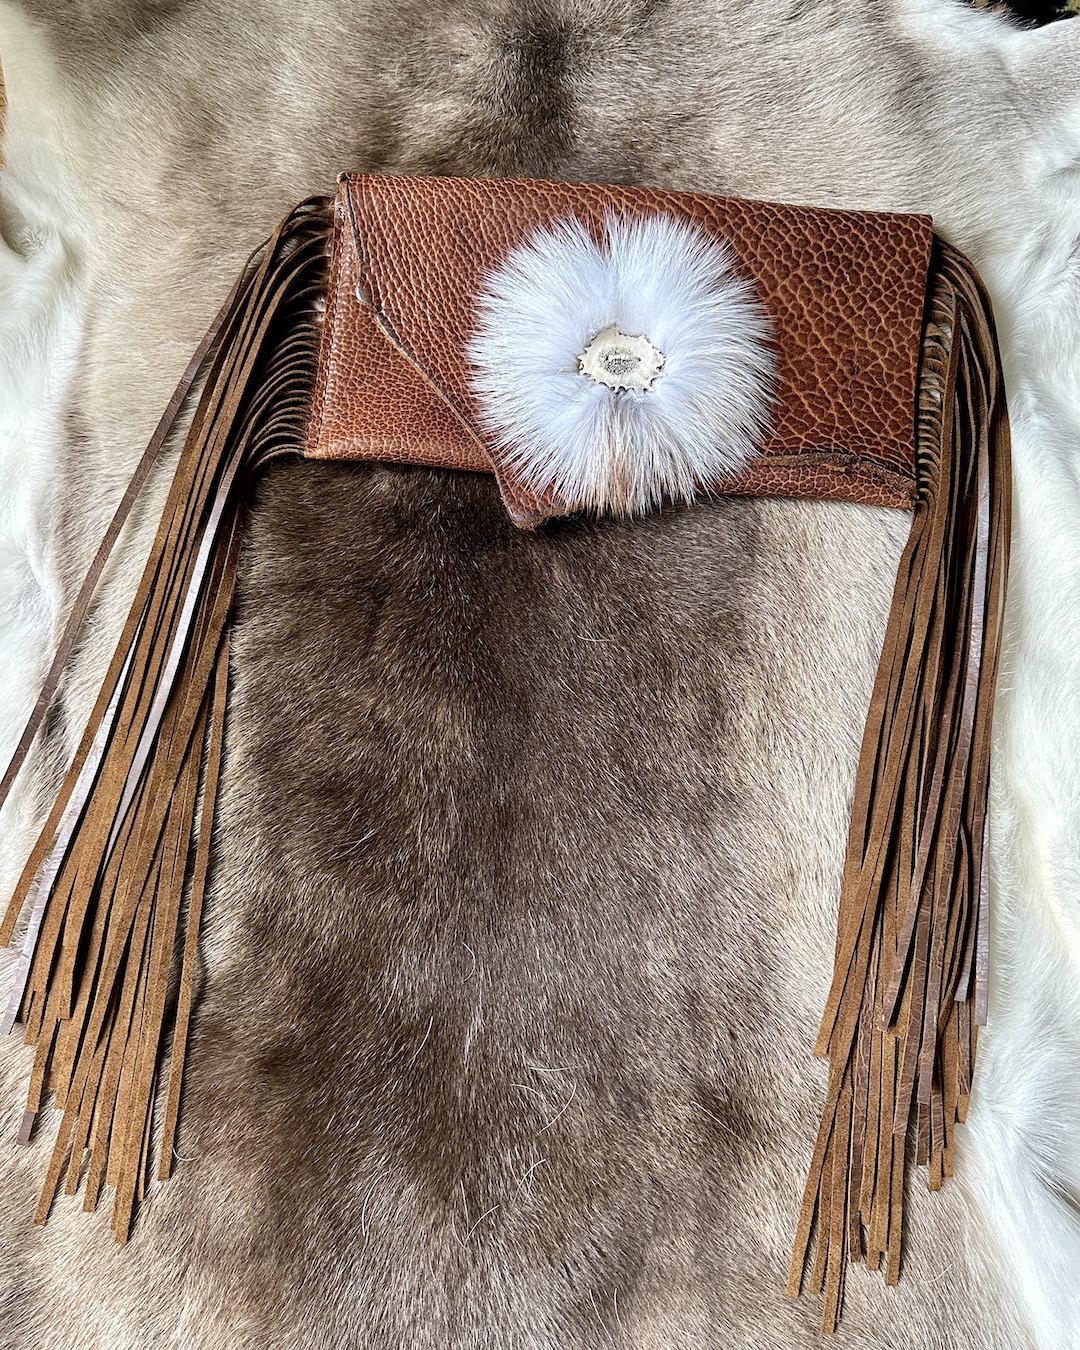 One of a kind bison leather clutch bag trimmed with long fringe and finished with fox fur and elk antler button.